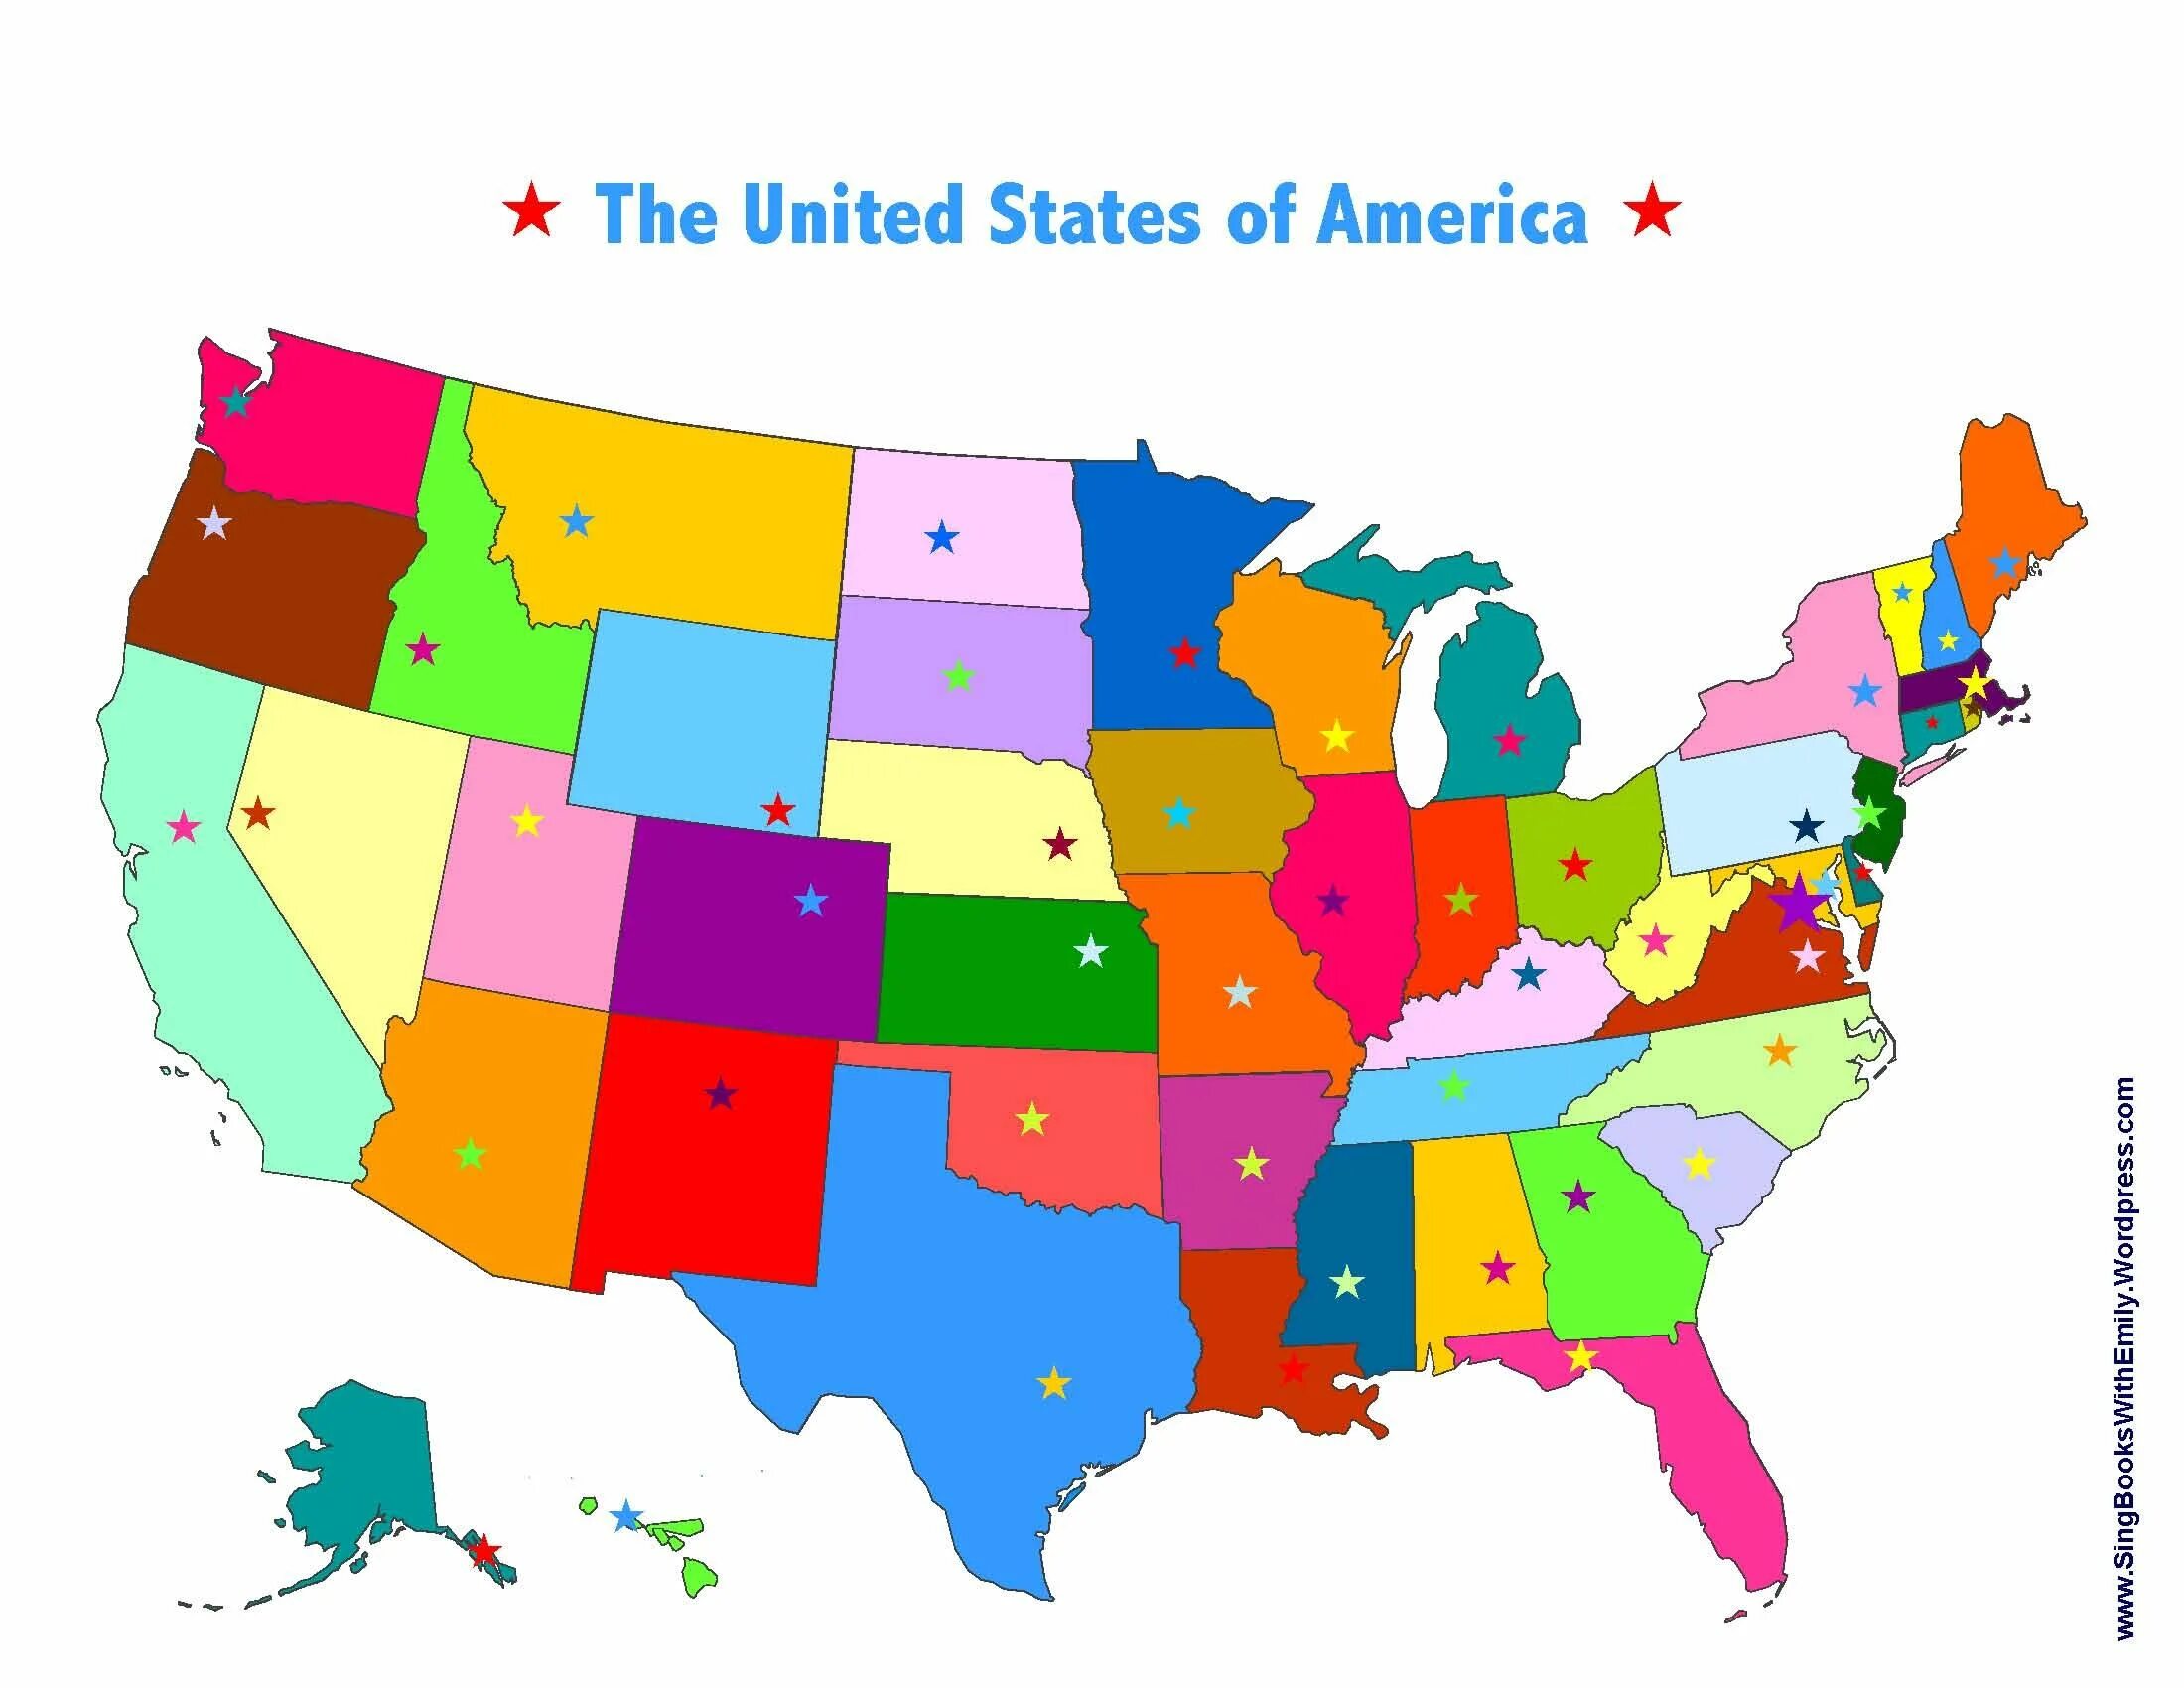 States formed. The United States of America карта. USA States Map. USA 50 States. USA States and Capitals Map.